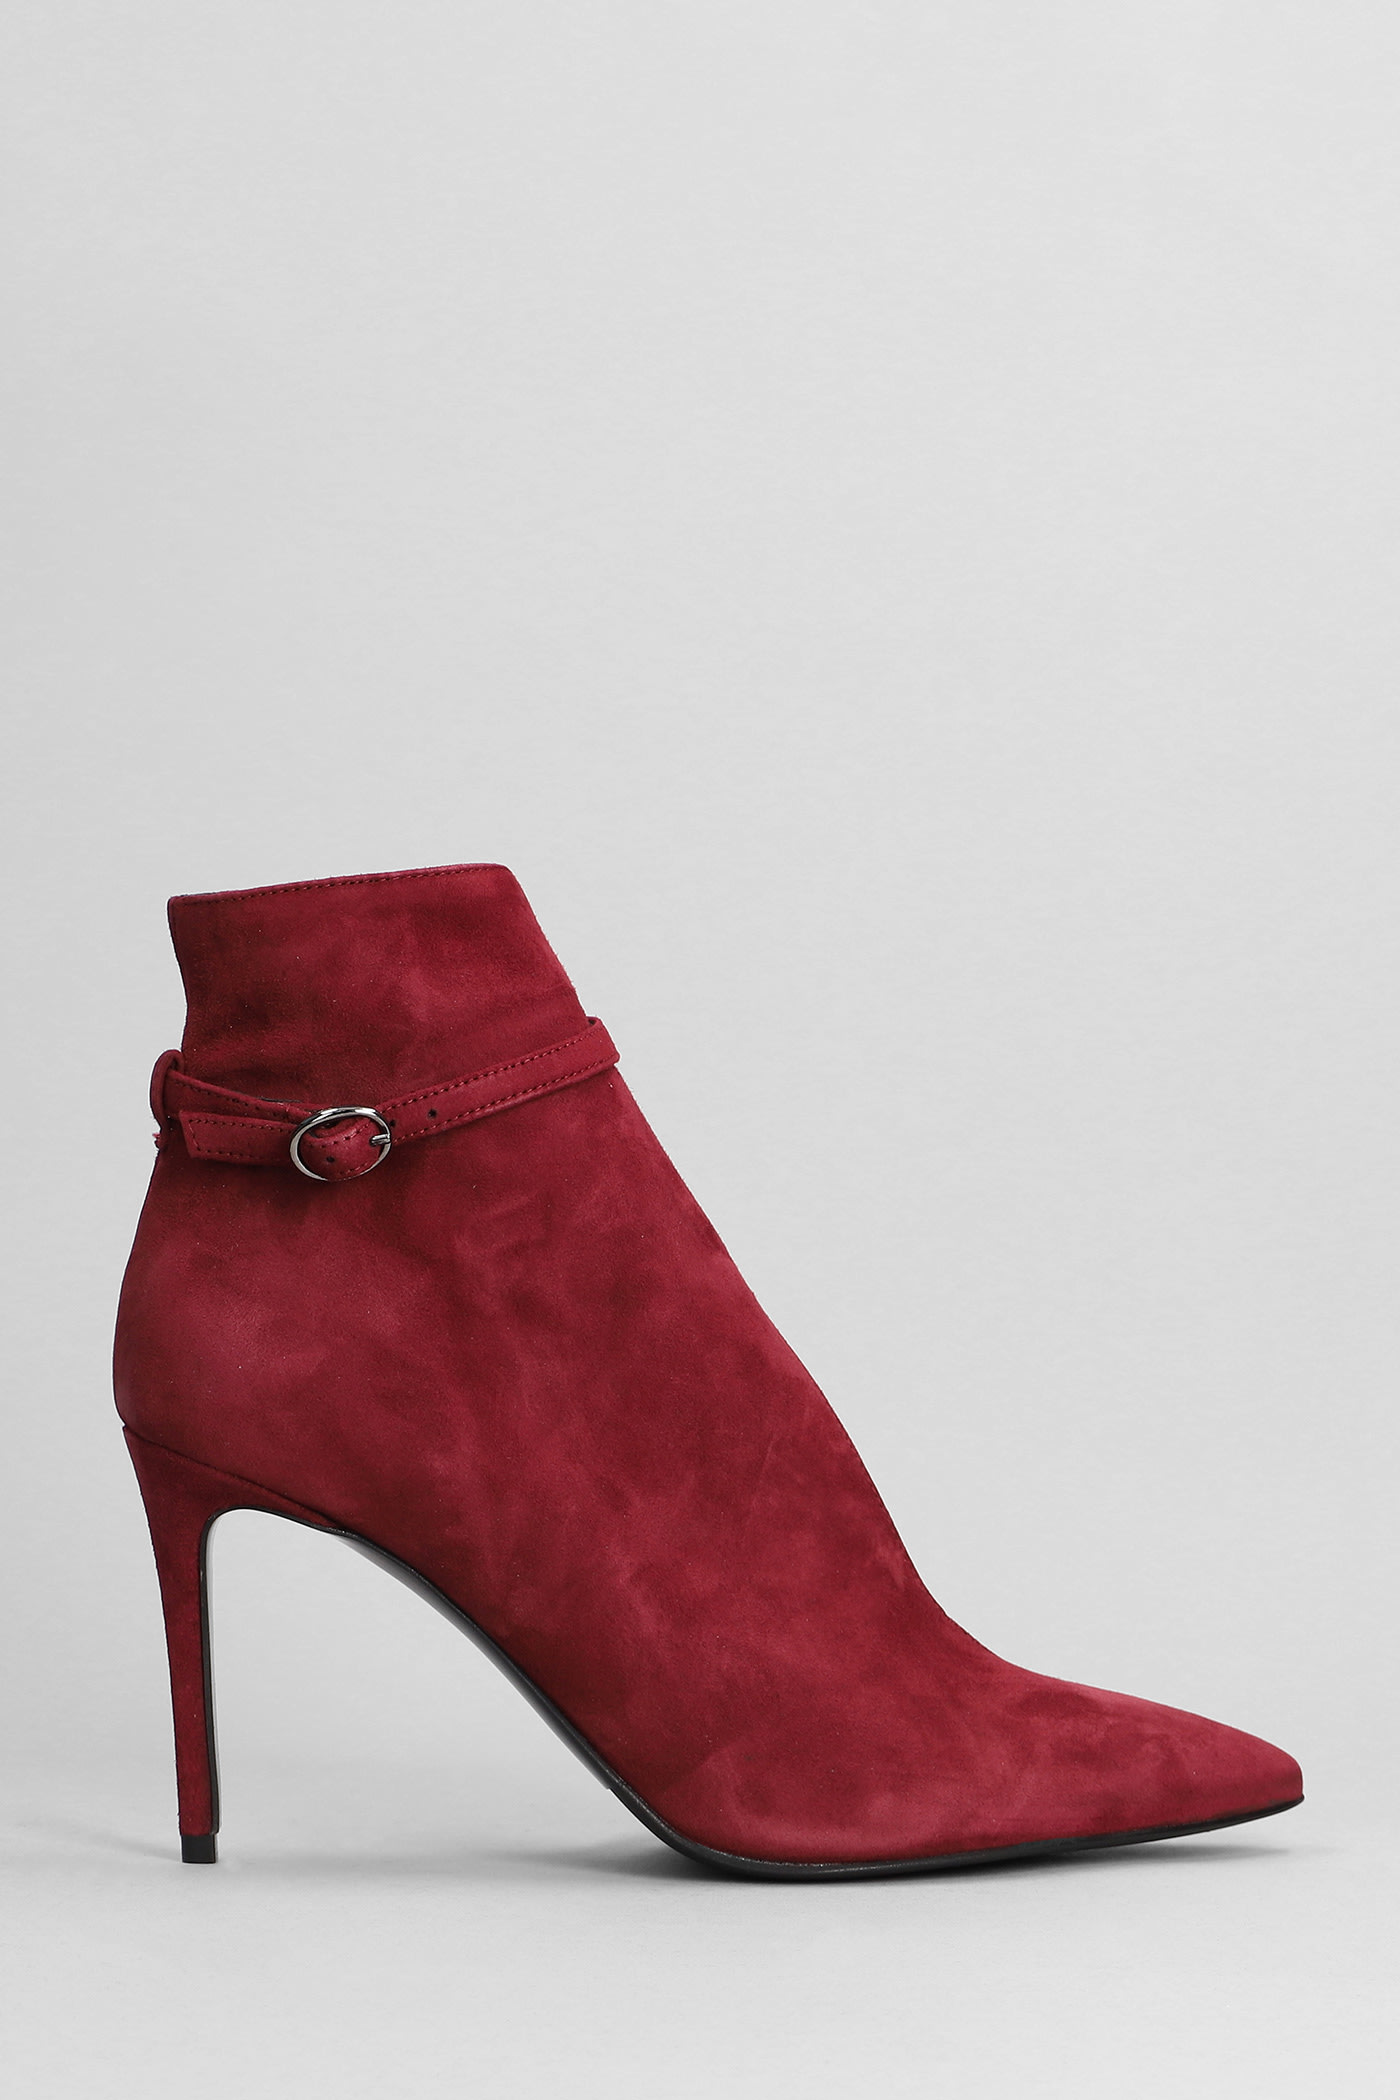 High Heels Ankle Boots In Bordeaux Suede